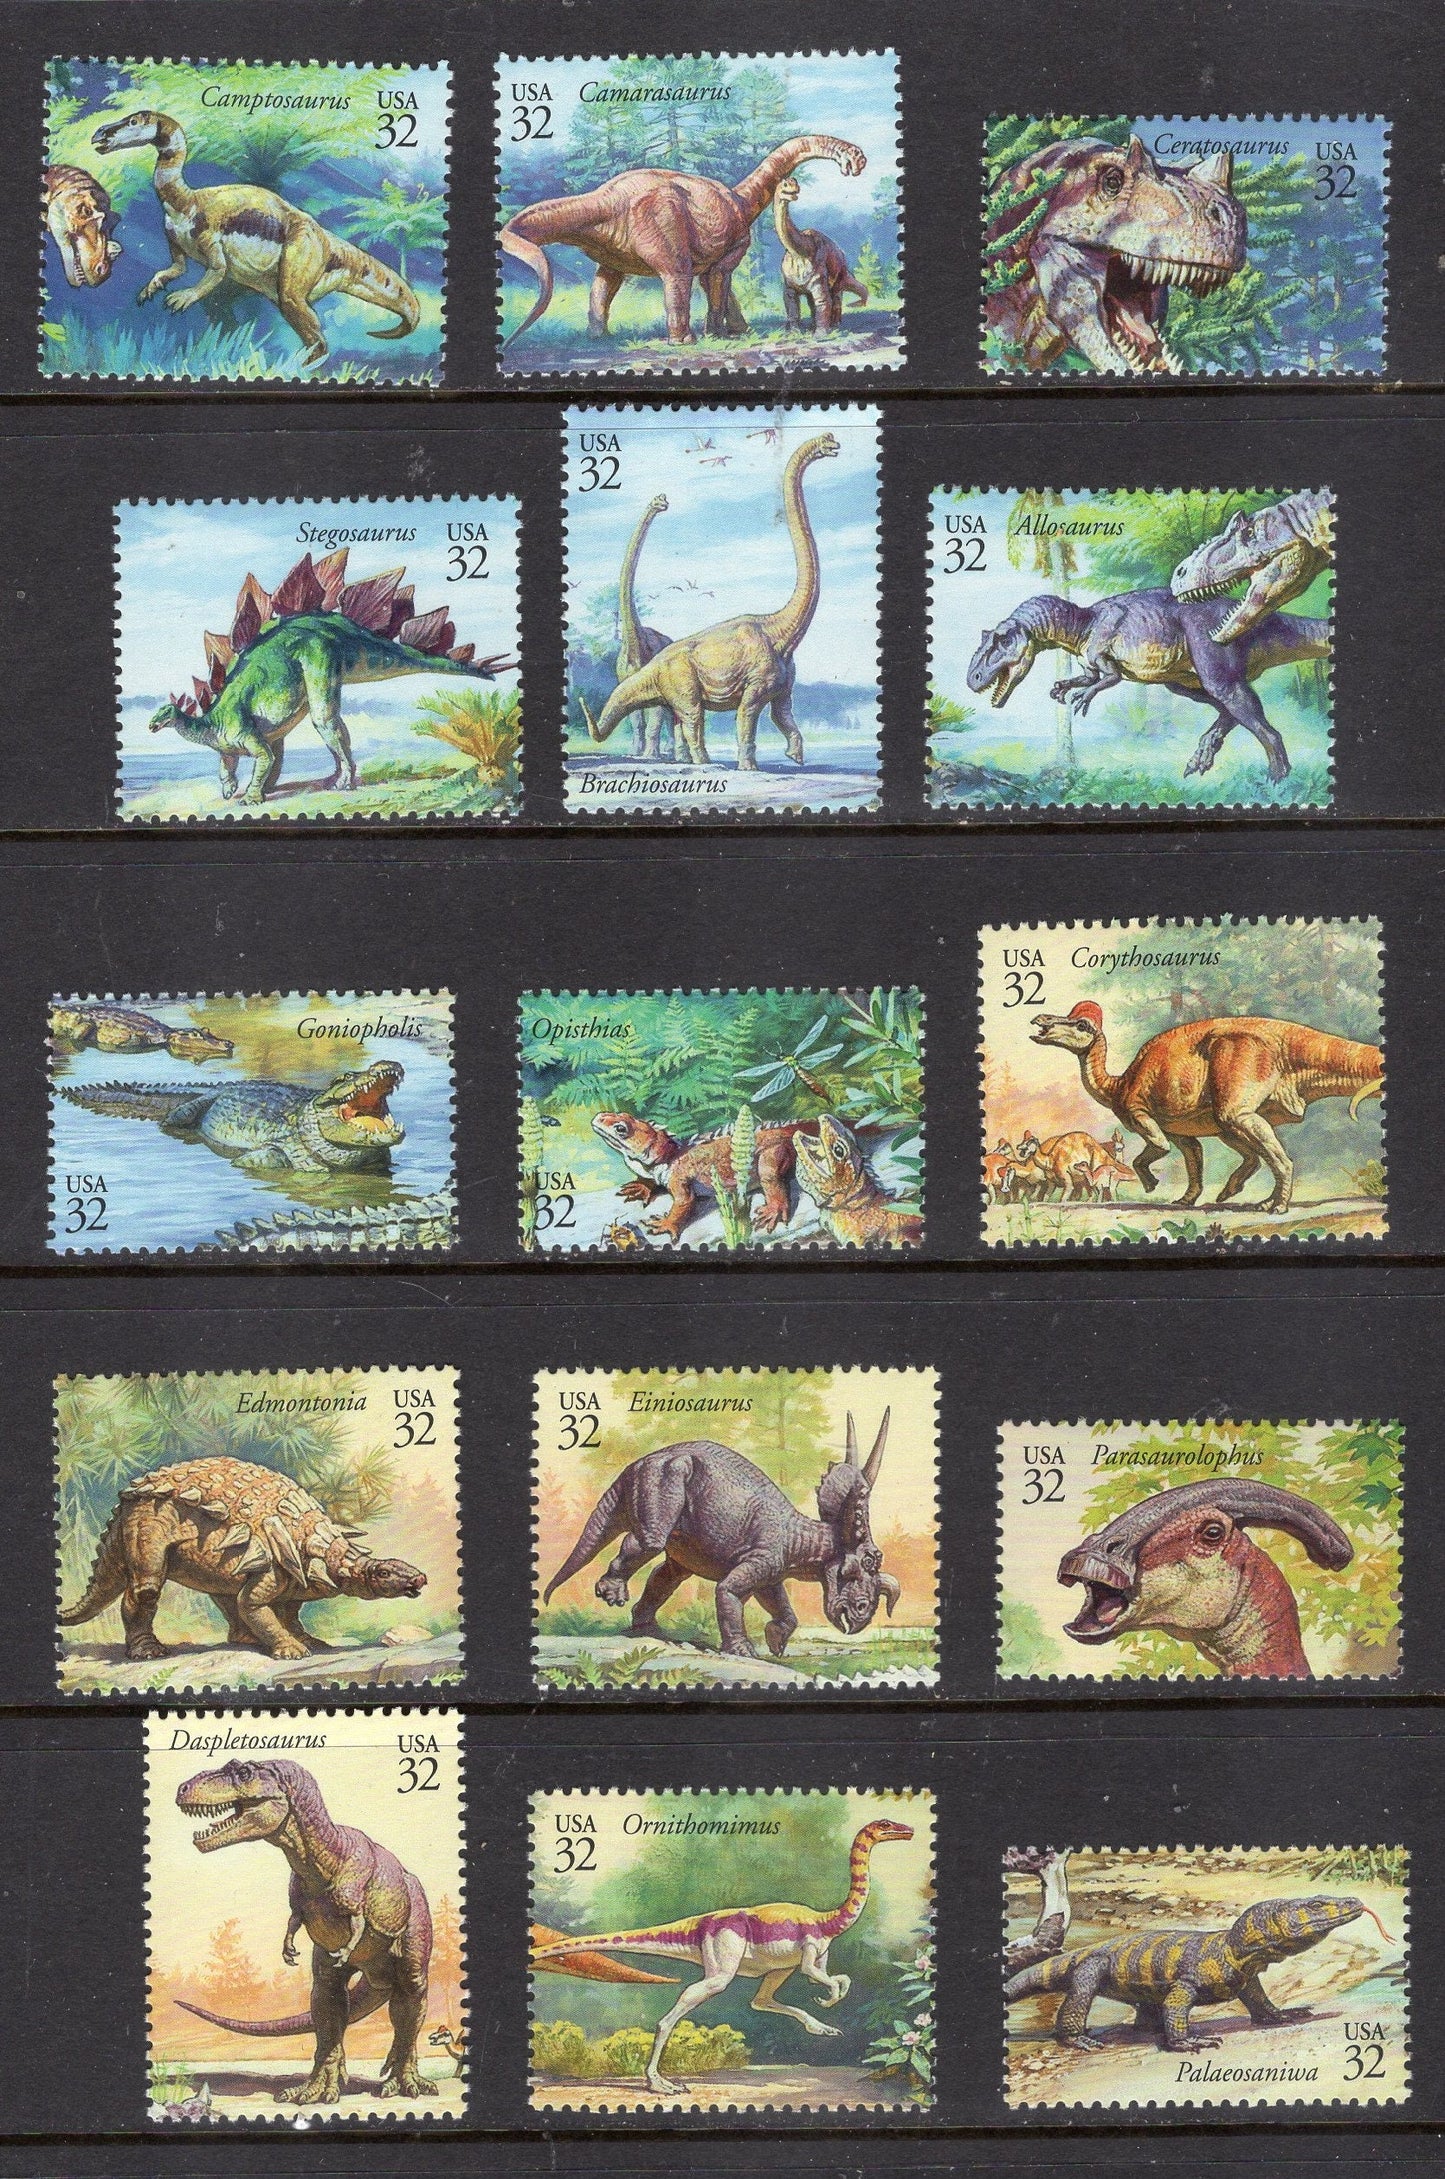 15 DINOSAUR USA STAMPS Depicting the World of Dinosaurs - Unused, Fresh, Bright Stamps - Issued in 1997  - s3136a-o -